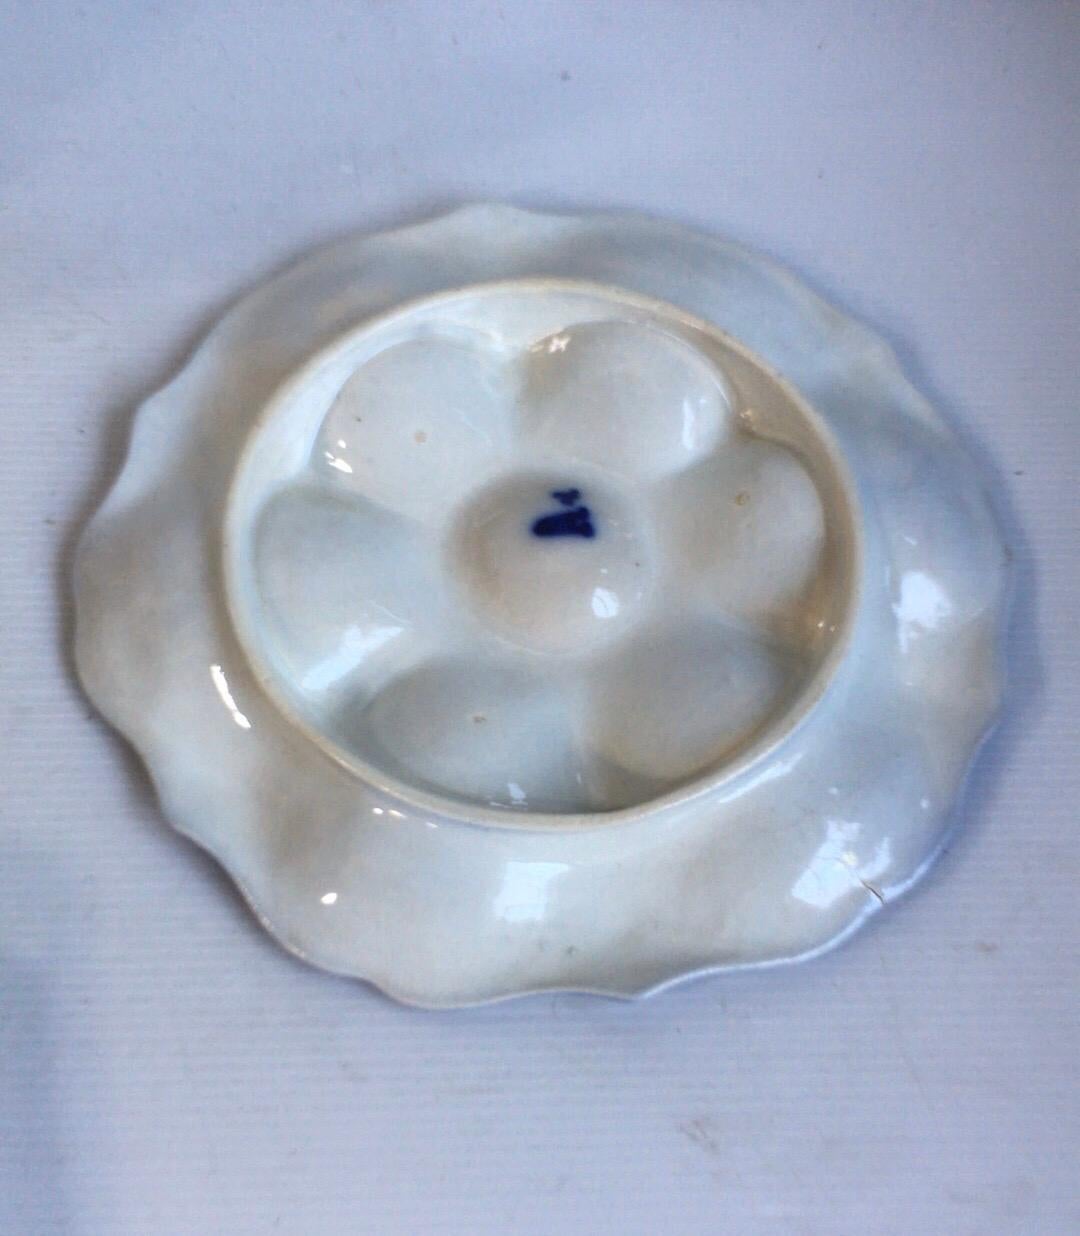 blue and white oyster plates